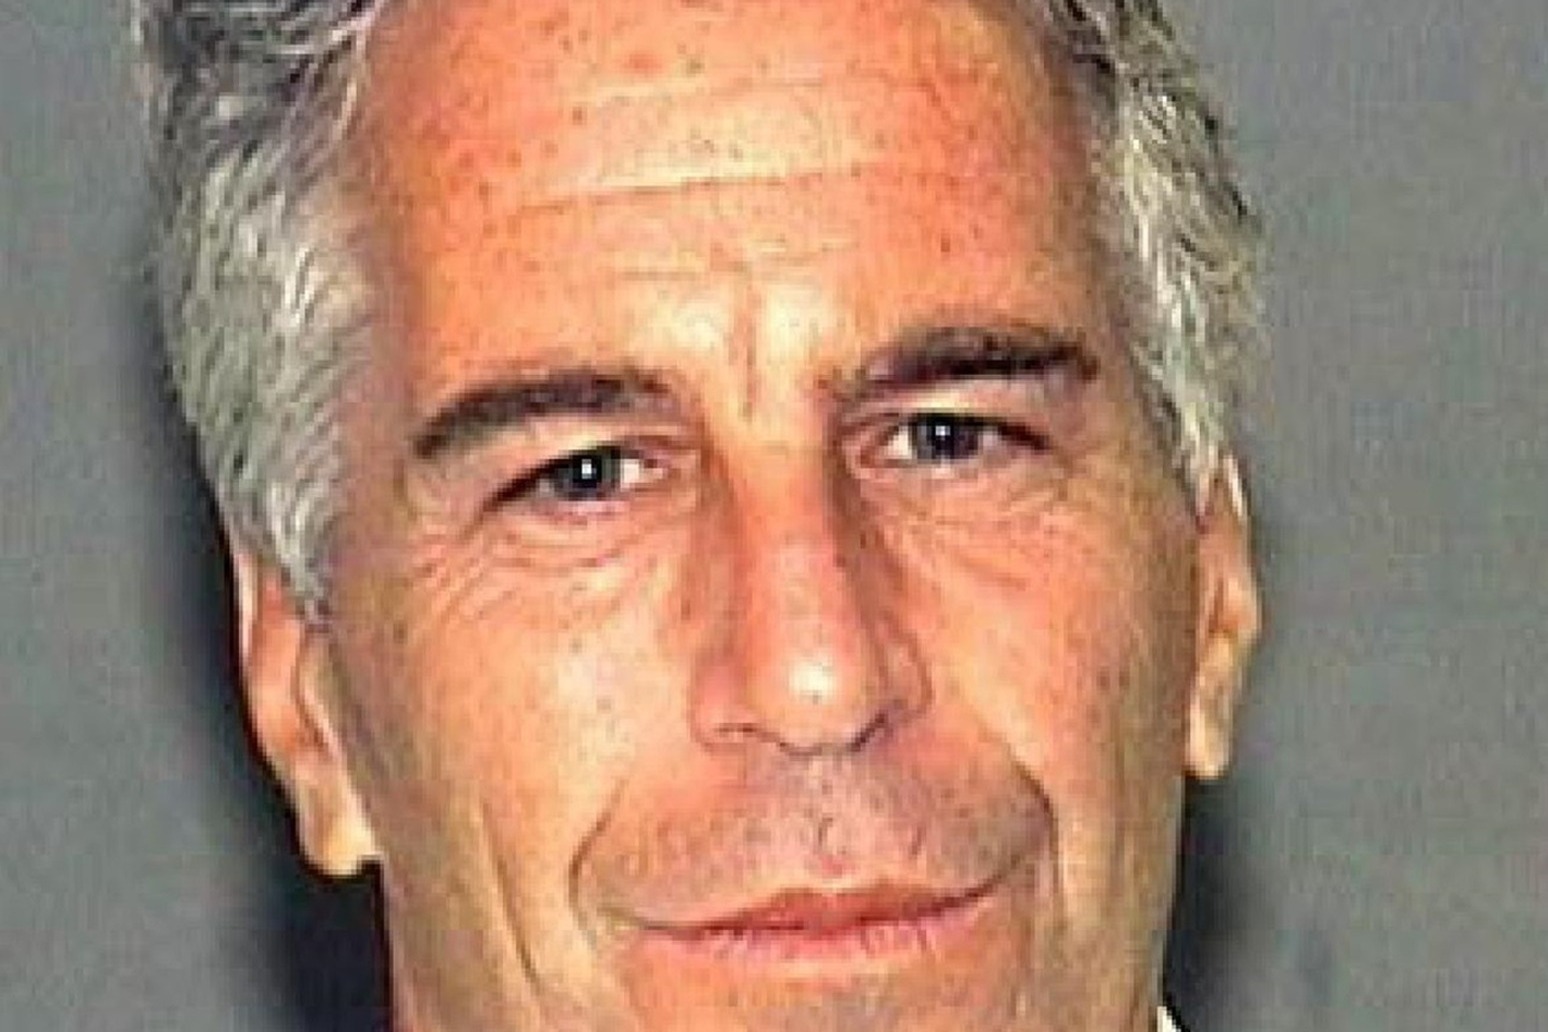 P Morgan settles claims that it enabled Jeffrey Epstein’s sex trafficking acts 